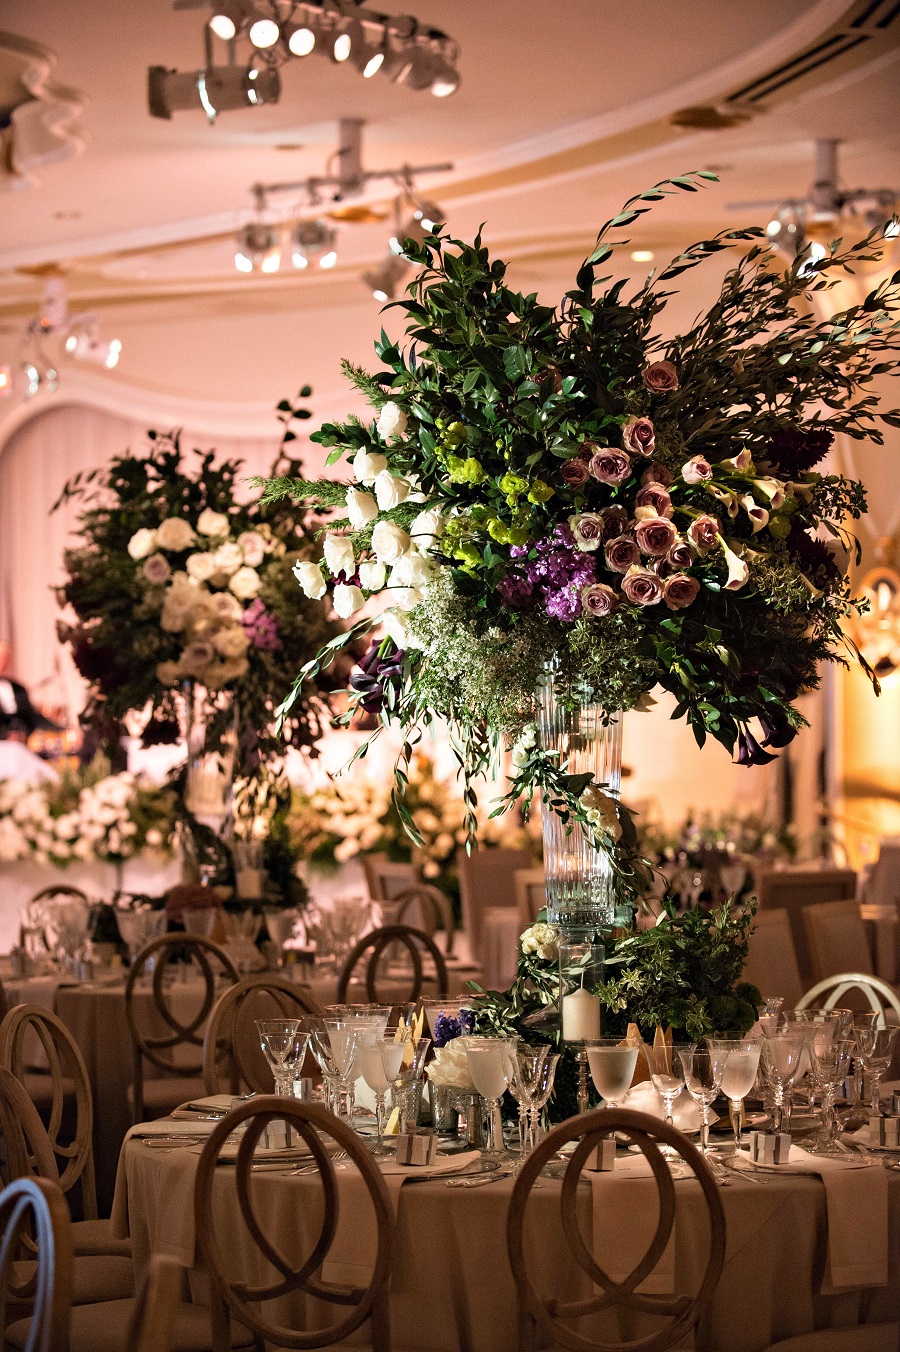 Marketa events, mark's garden, the lighter side, Laurie Bailey Photography, blush lighting, beverly hills hotel